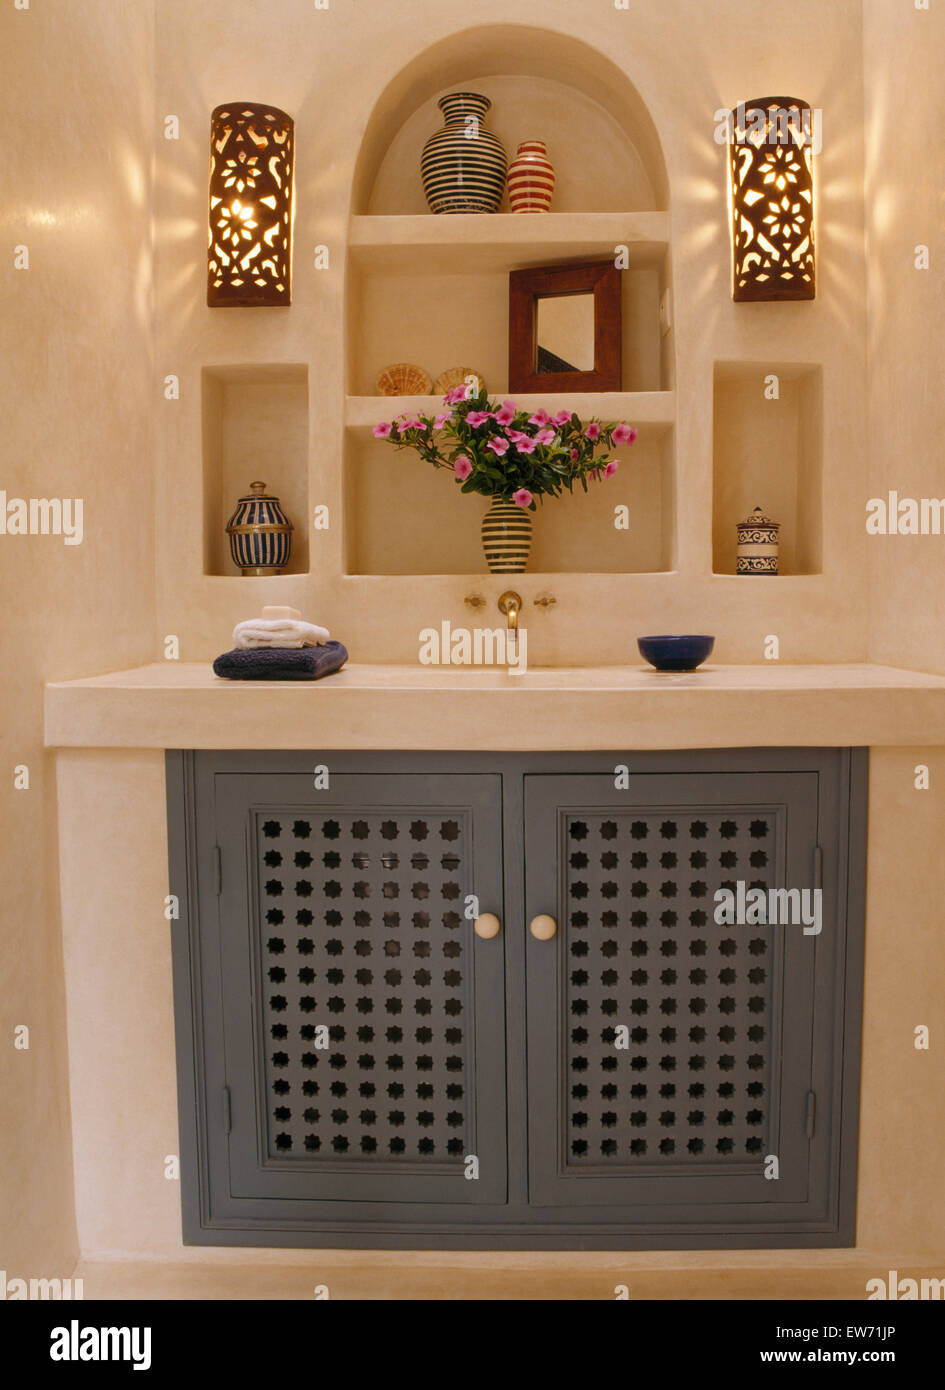 Wall lights on either side of alcove shelves above cupboard with blue fretwork doors in Moroccan bathroom Stock Photo